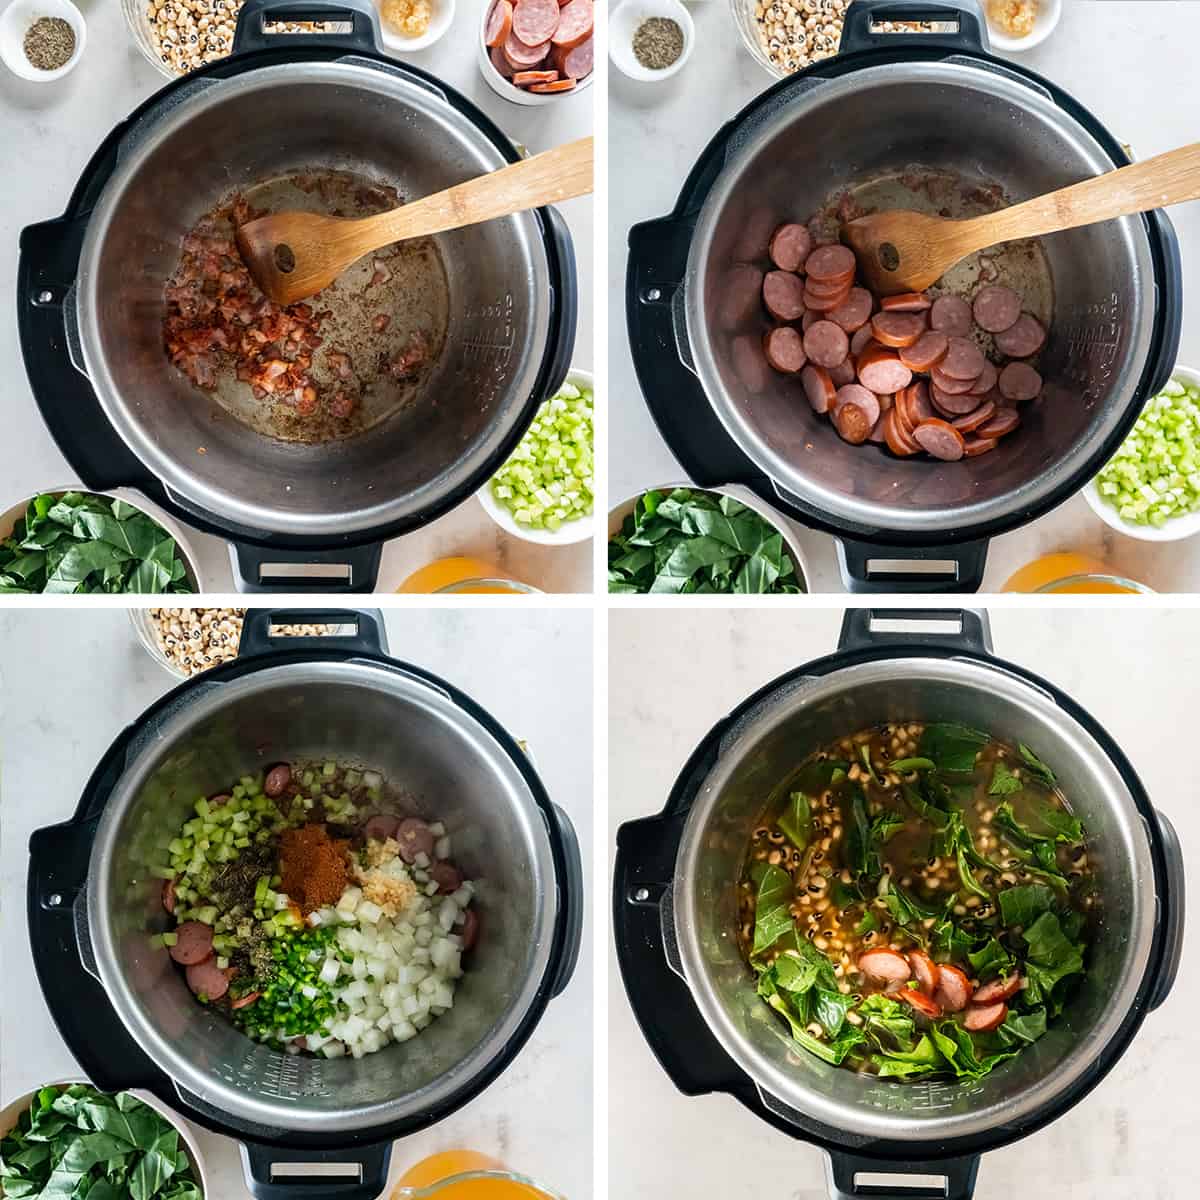 Black eyed peas, sausage, and other ingredients cooking in an Instant Pot.